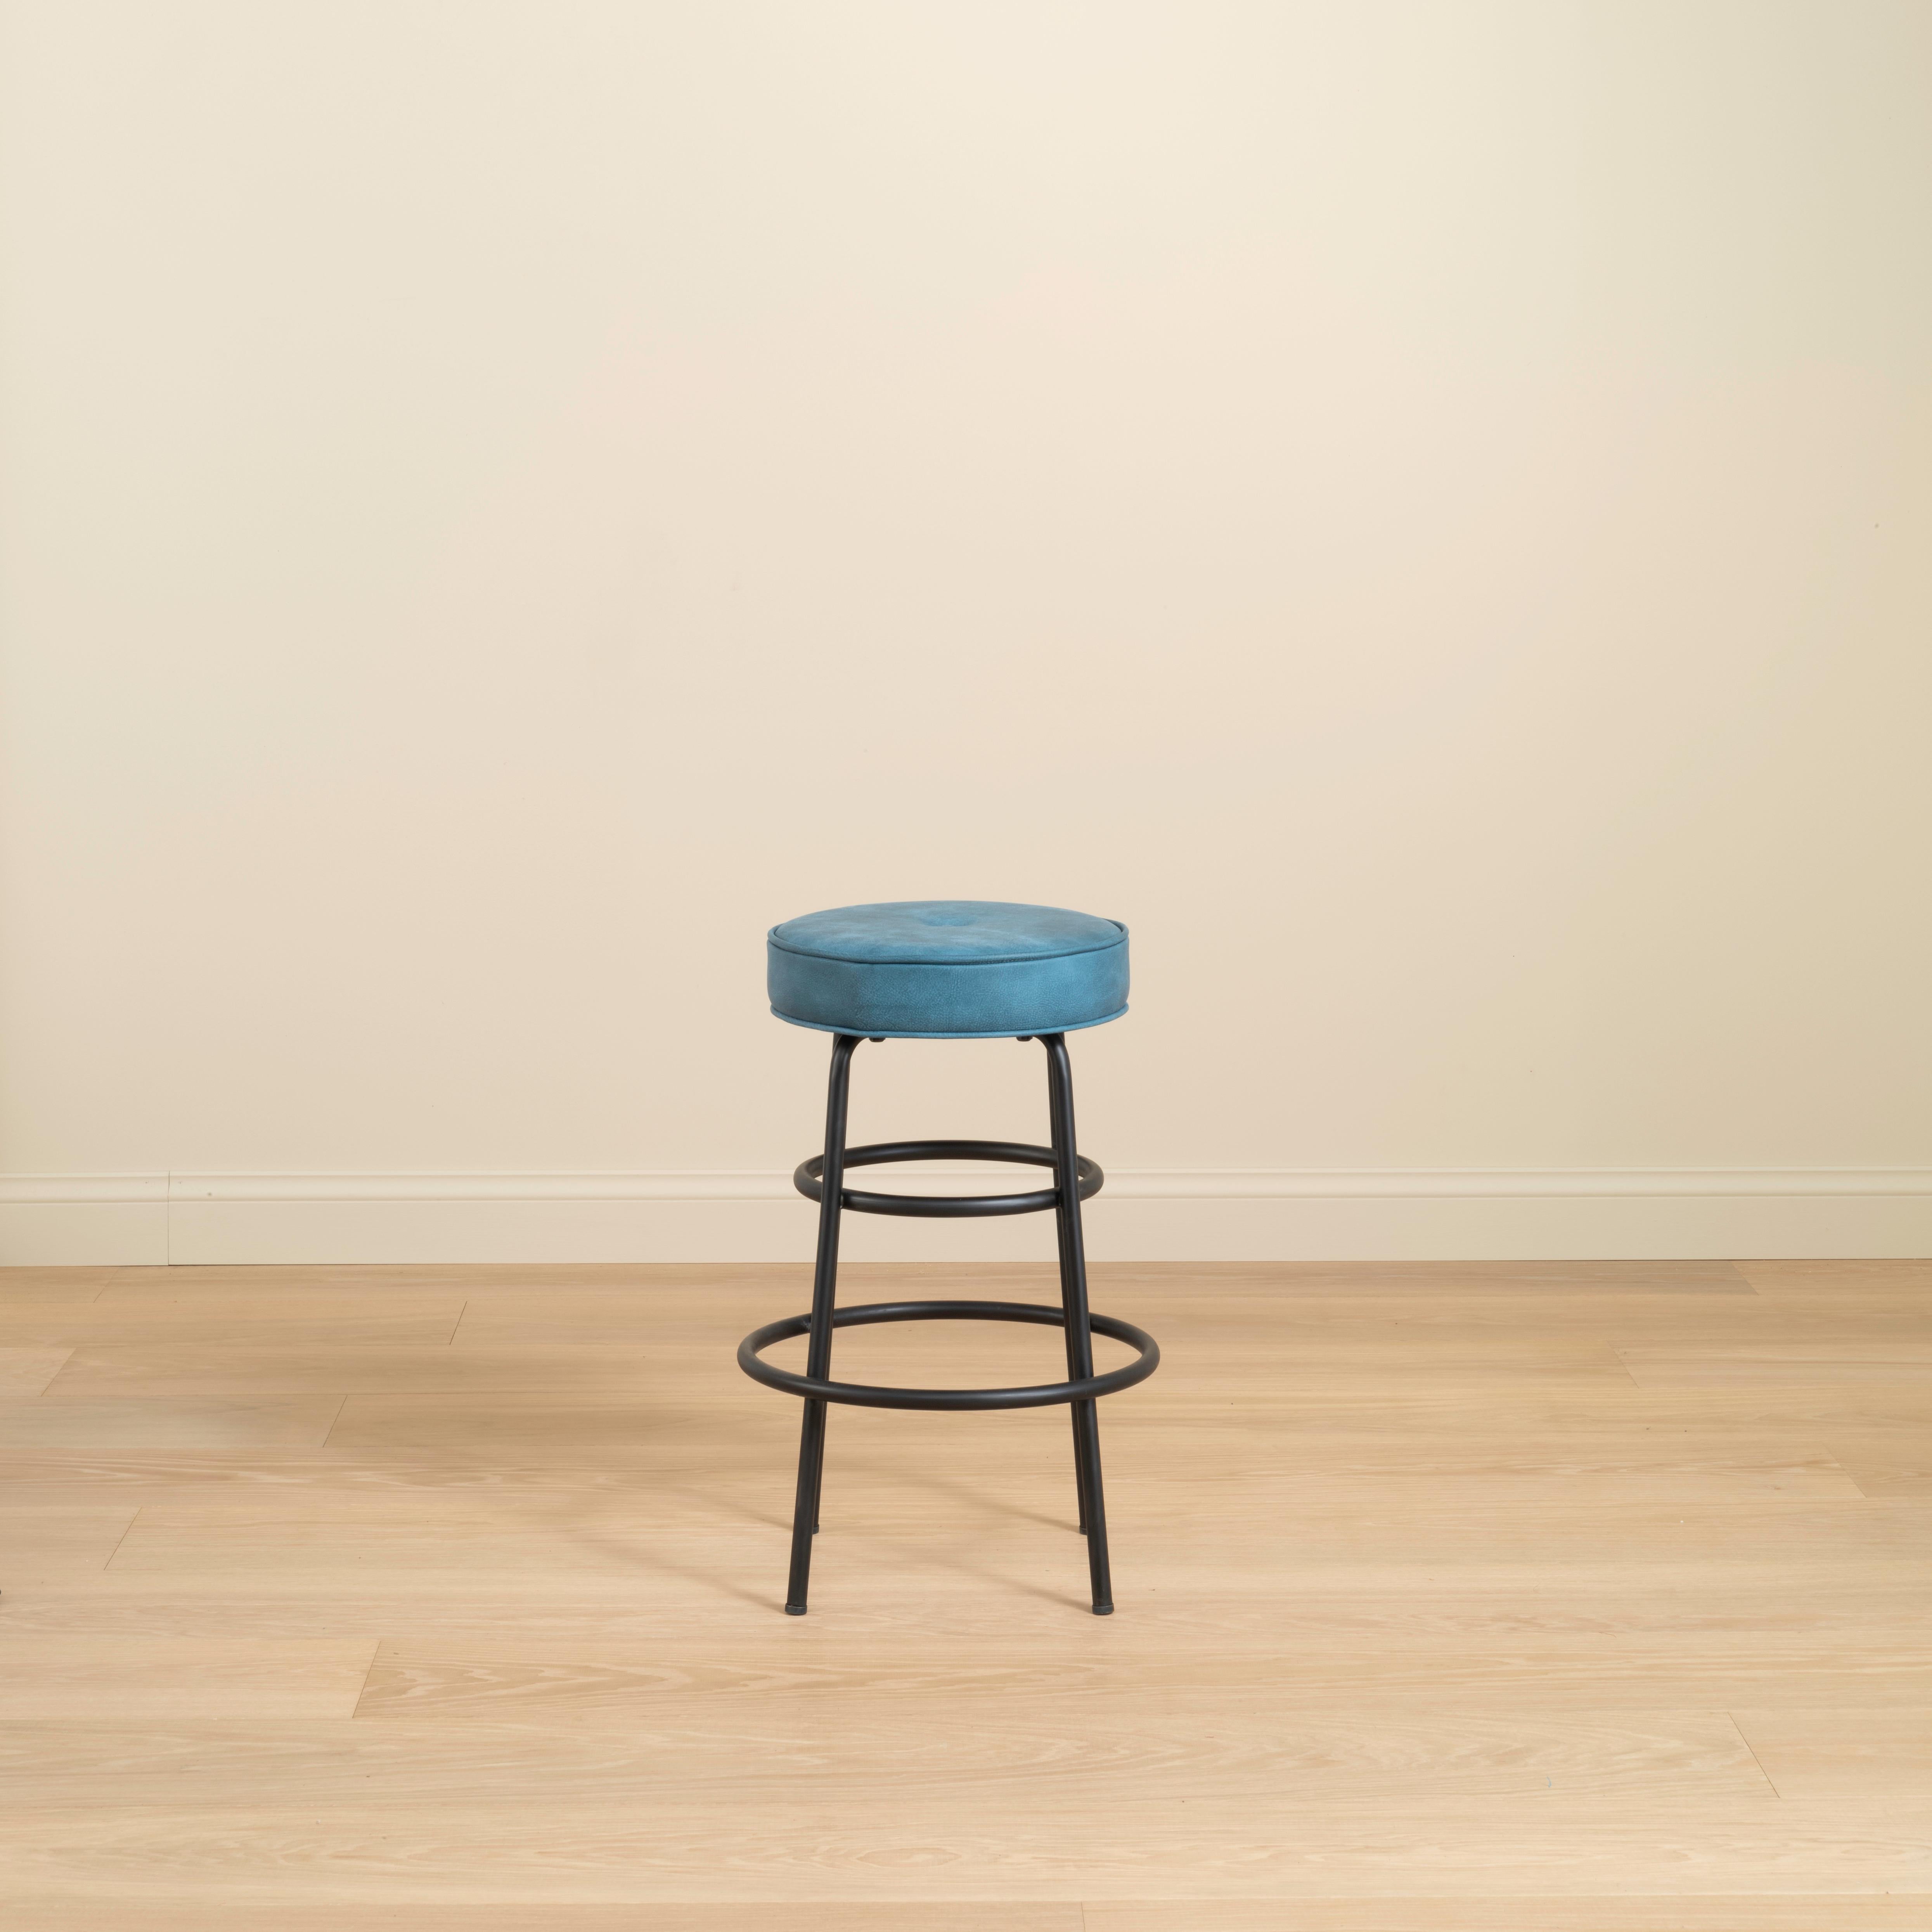 The Hoop Bar Stool features a deep and comfortable fitted cushion, upholstered in-house using the client’s choice of leather or fabric. The circular lines of the cushion are reflected in the fitted rings that hug the steel chair legs.

Upholstered